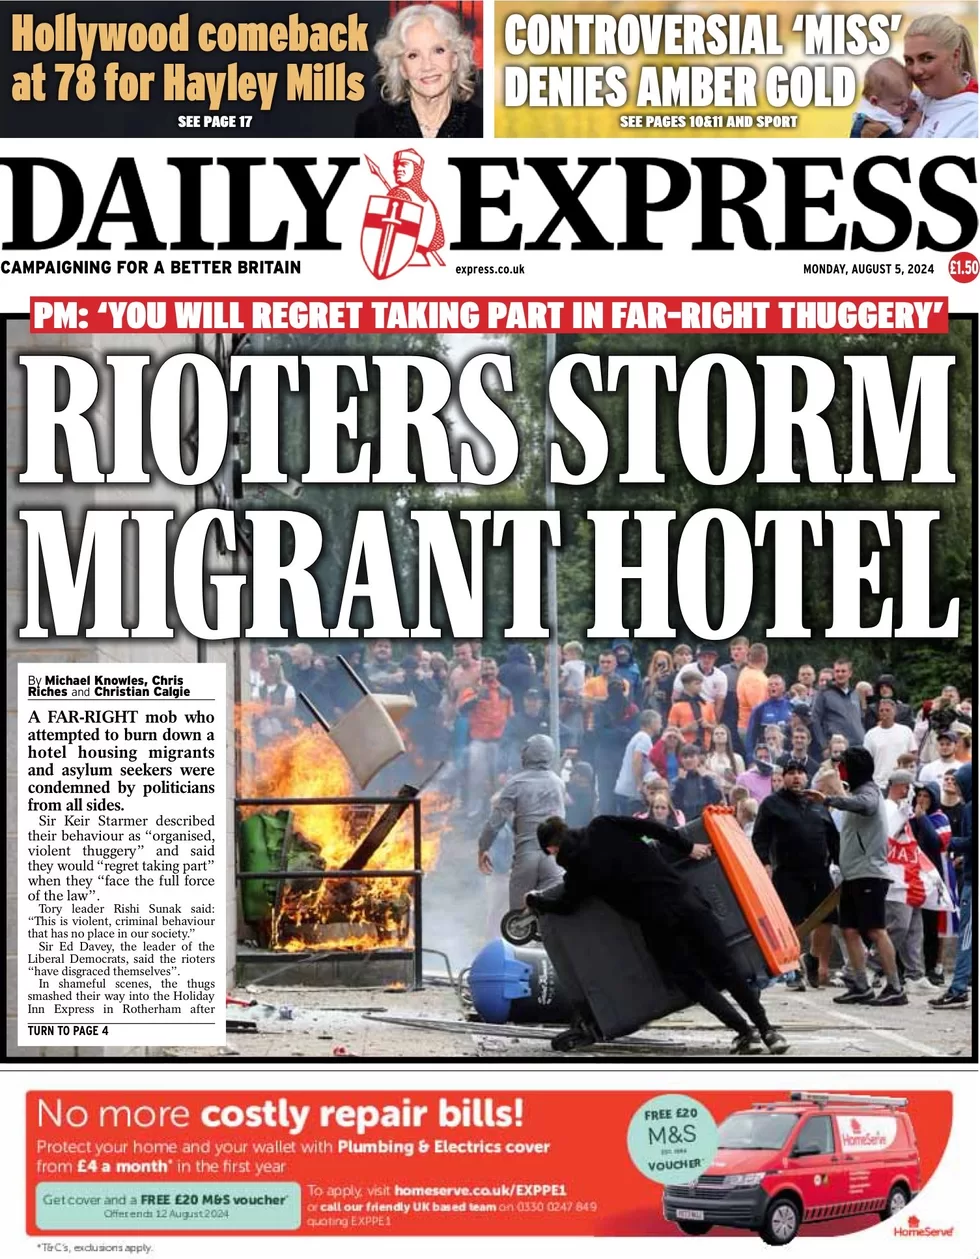 Daily Express - Rioters storm migrant hotel
